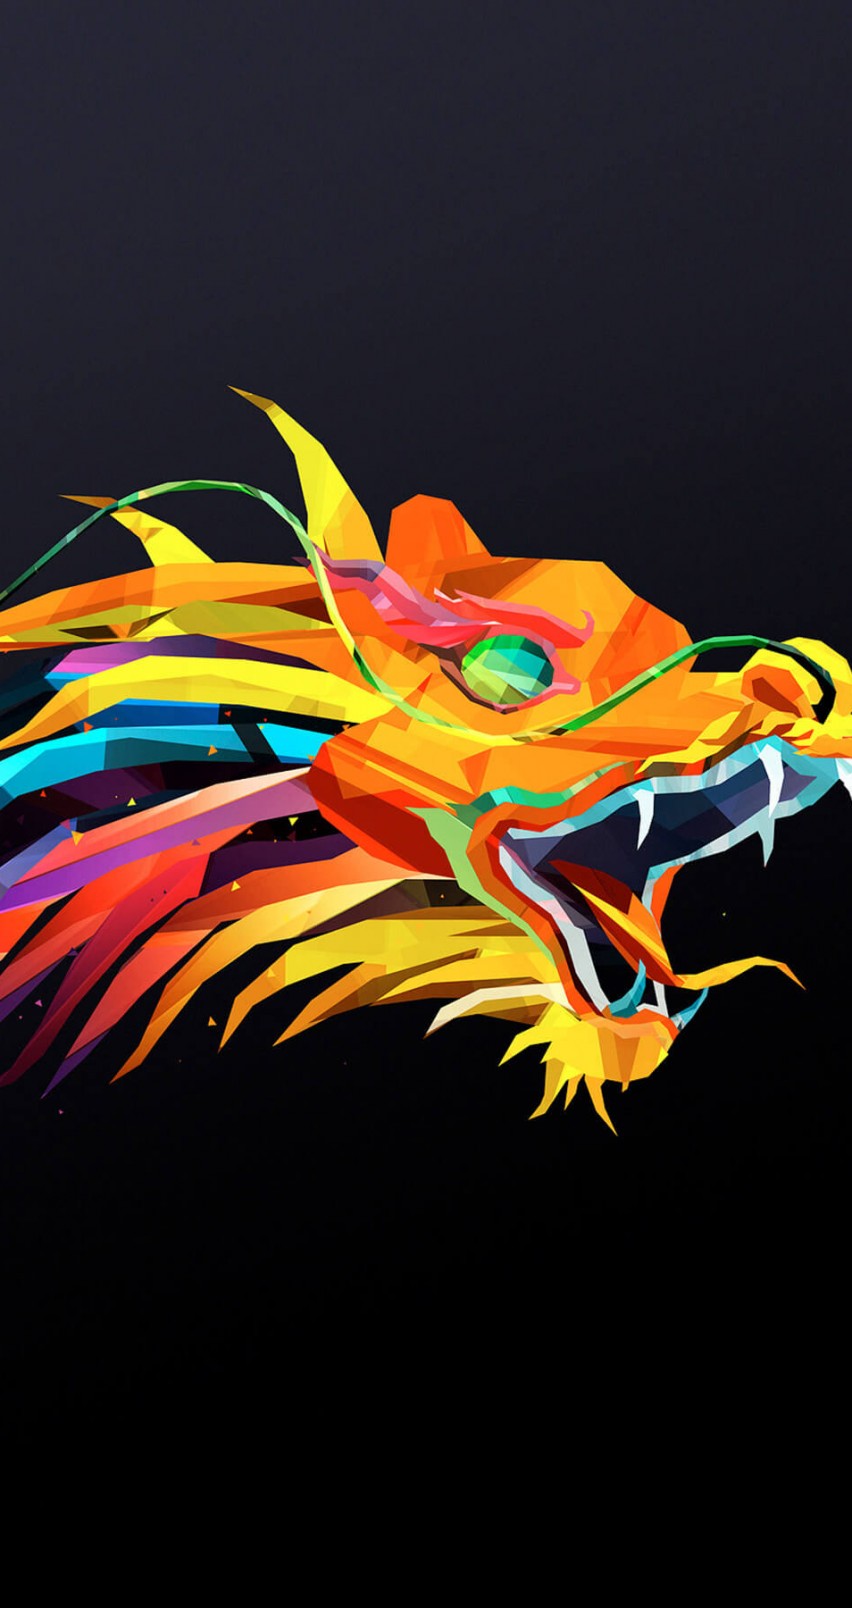 Download The Dragon HD wallpaper for iPhone 6 6s   HDwallpapersnet